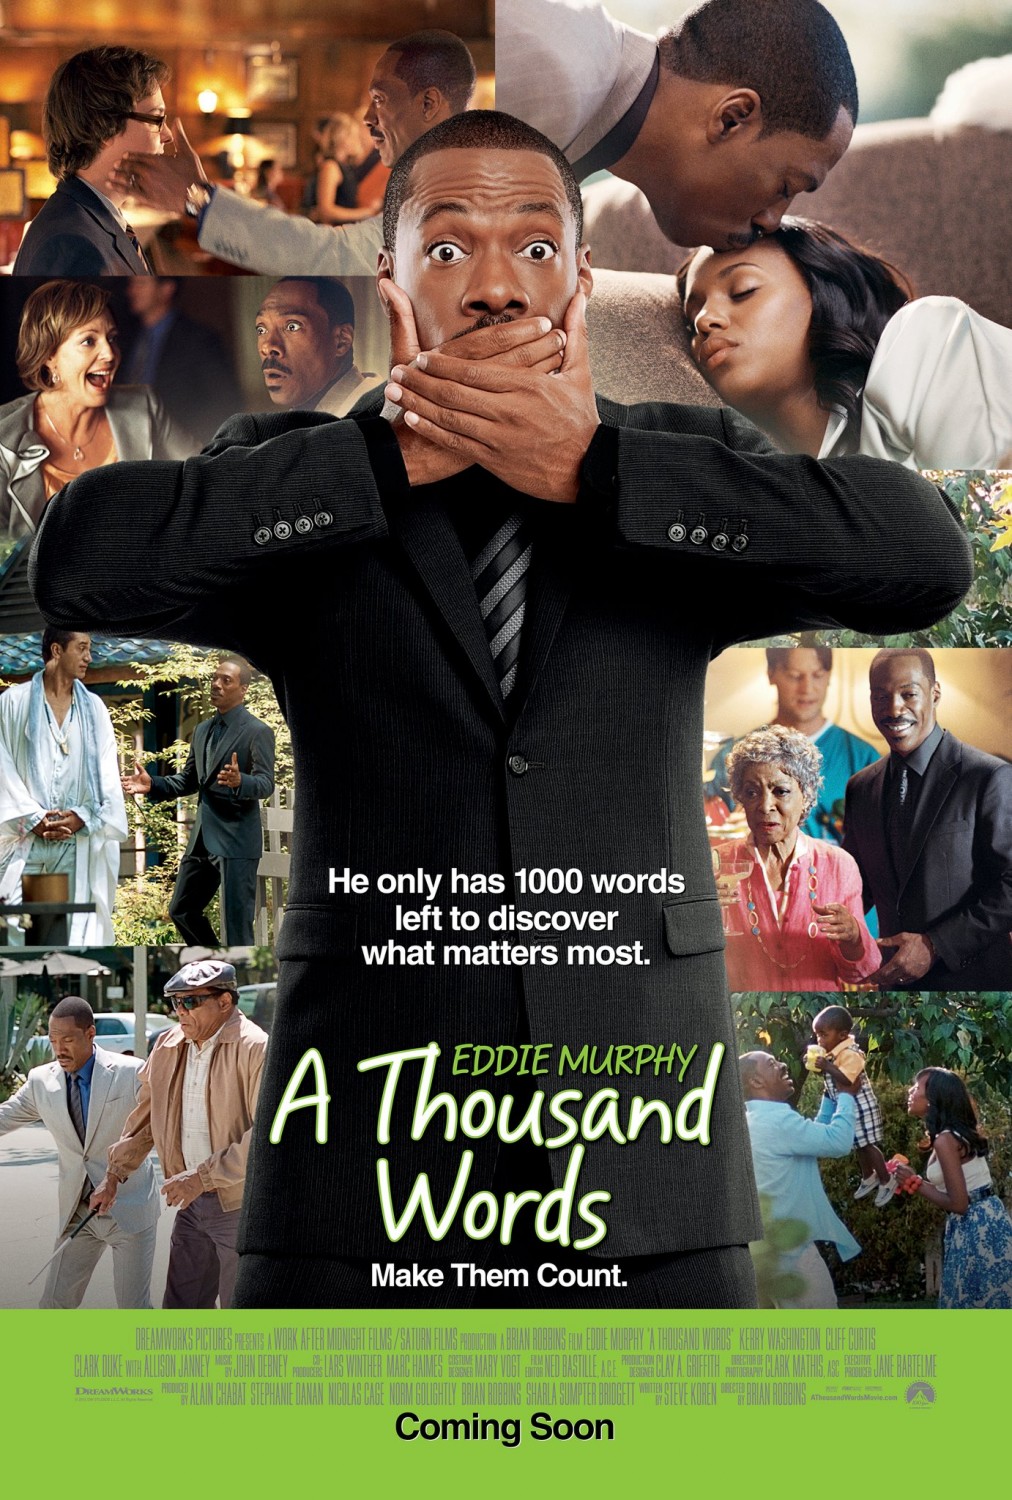 The Words 2012 Movie Poster